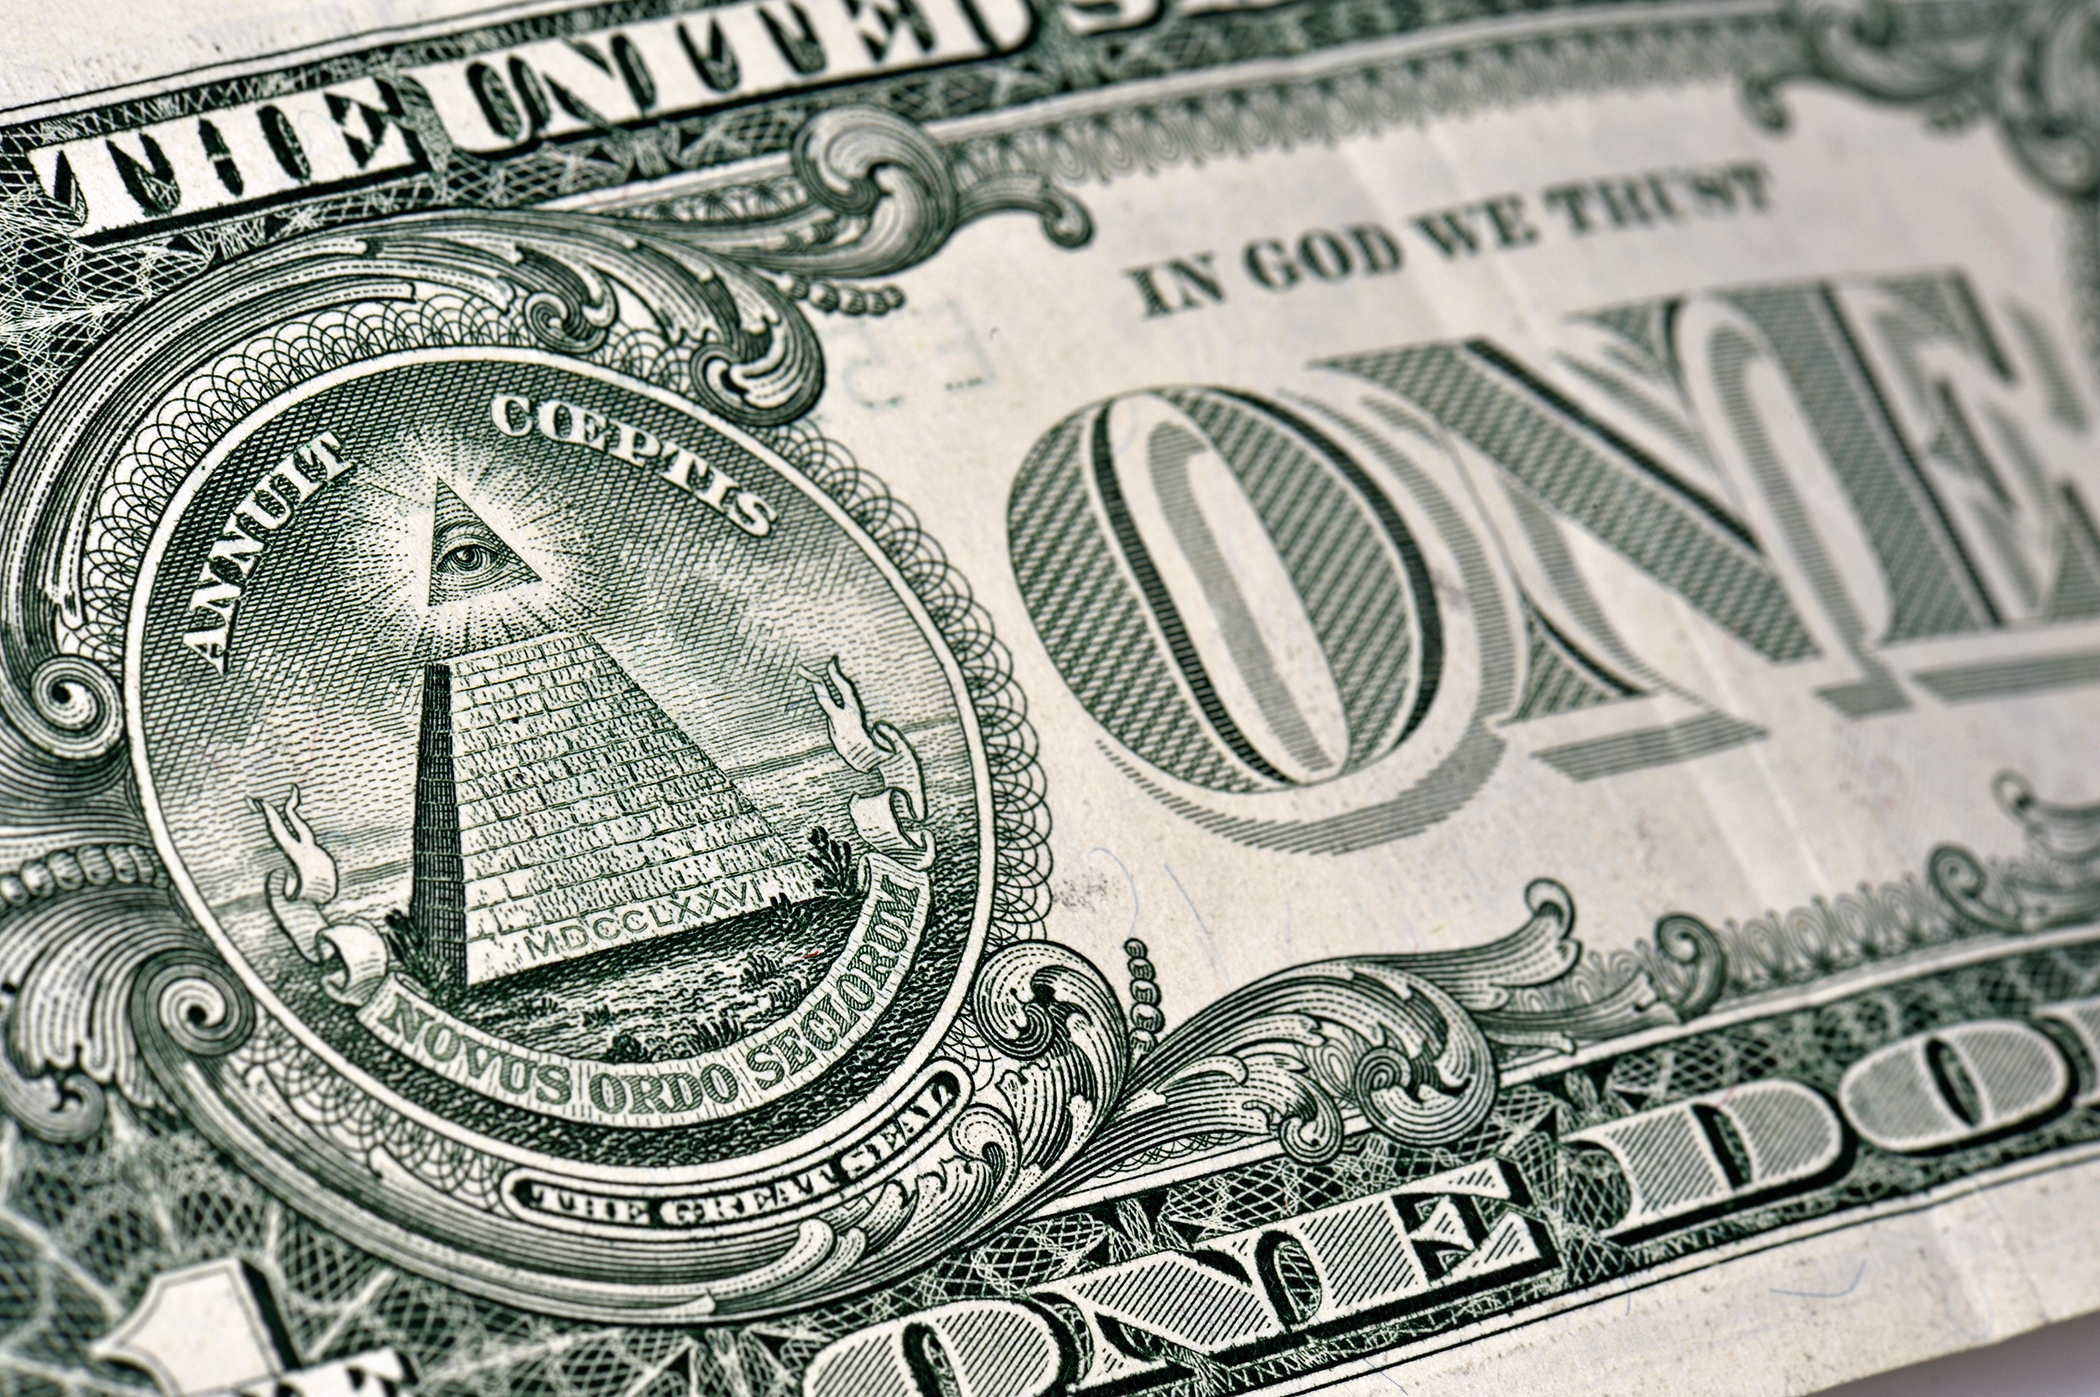 10 Facts About the $1 Bill - Fun One Dollar Bill Trivia | Money